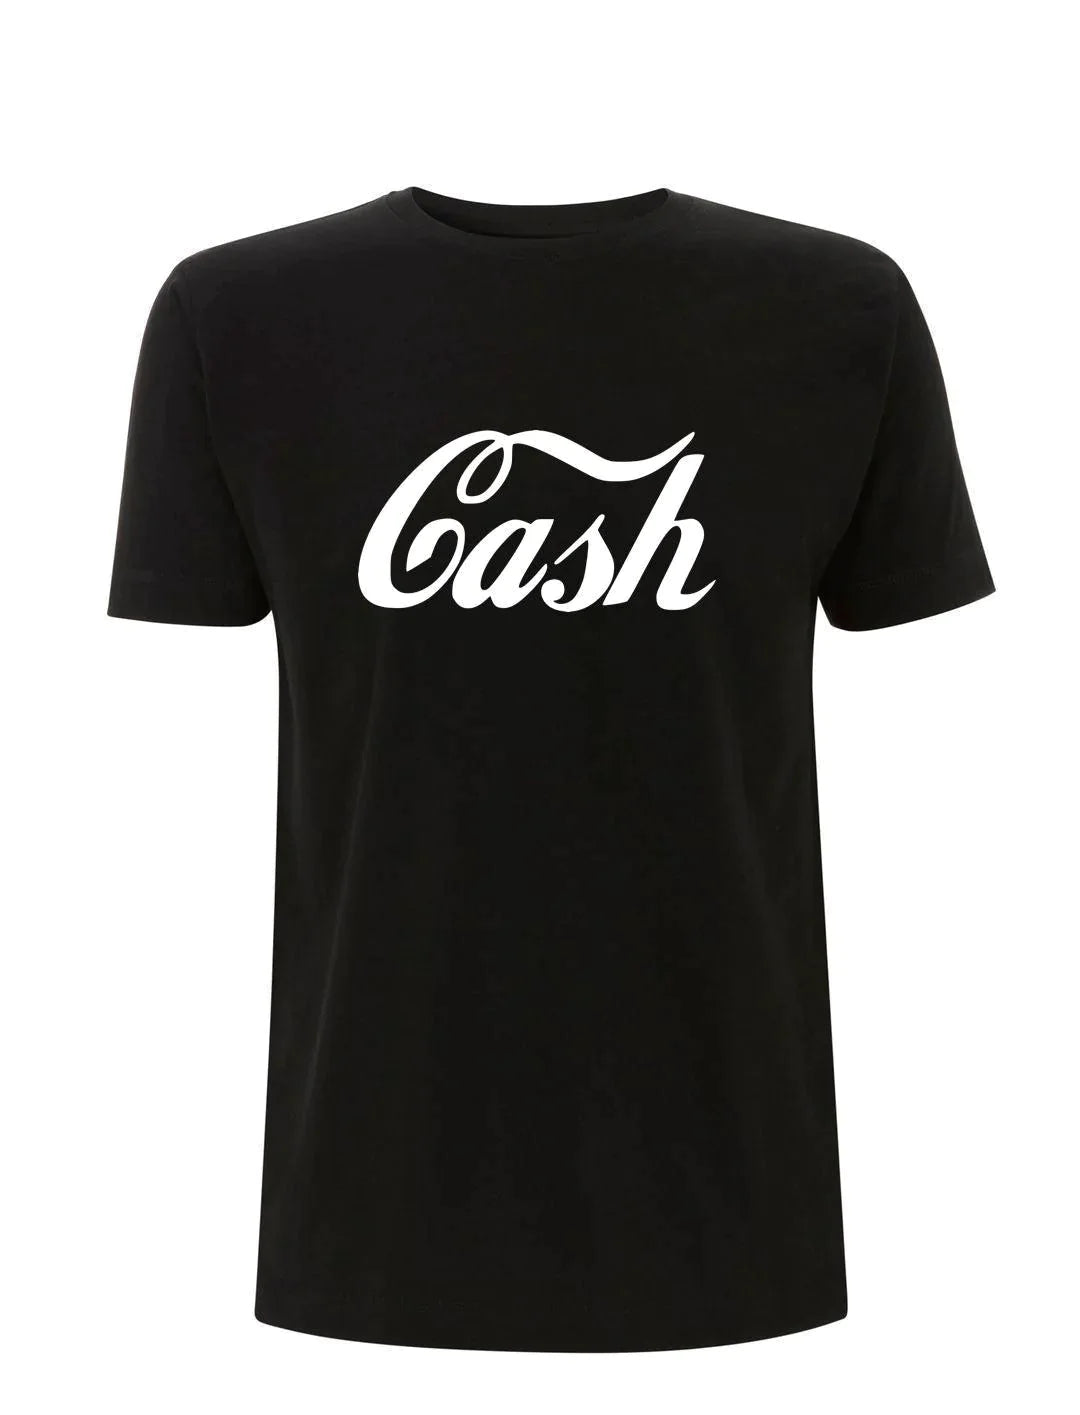 CASH:  T-Shirt As Worn by Jack White (The White Stripes) Many Colours - SOUND IS COLOUR